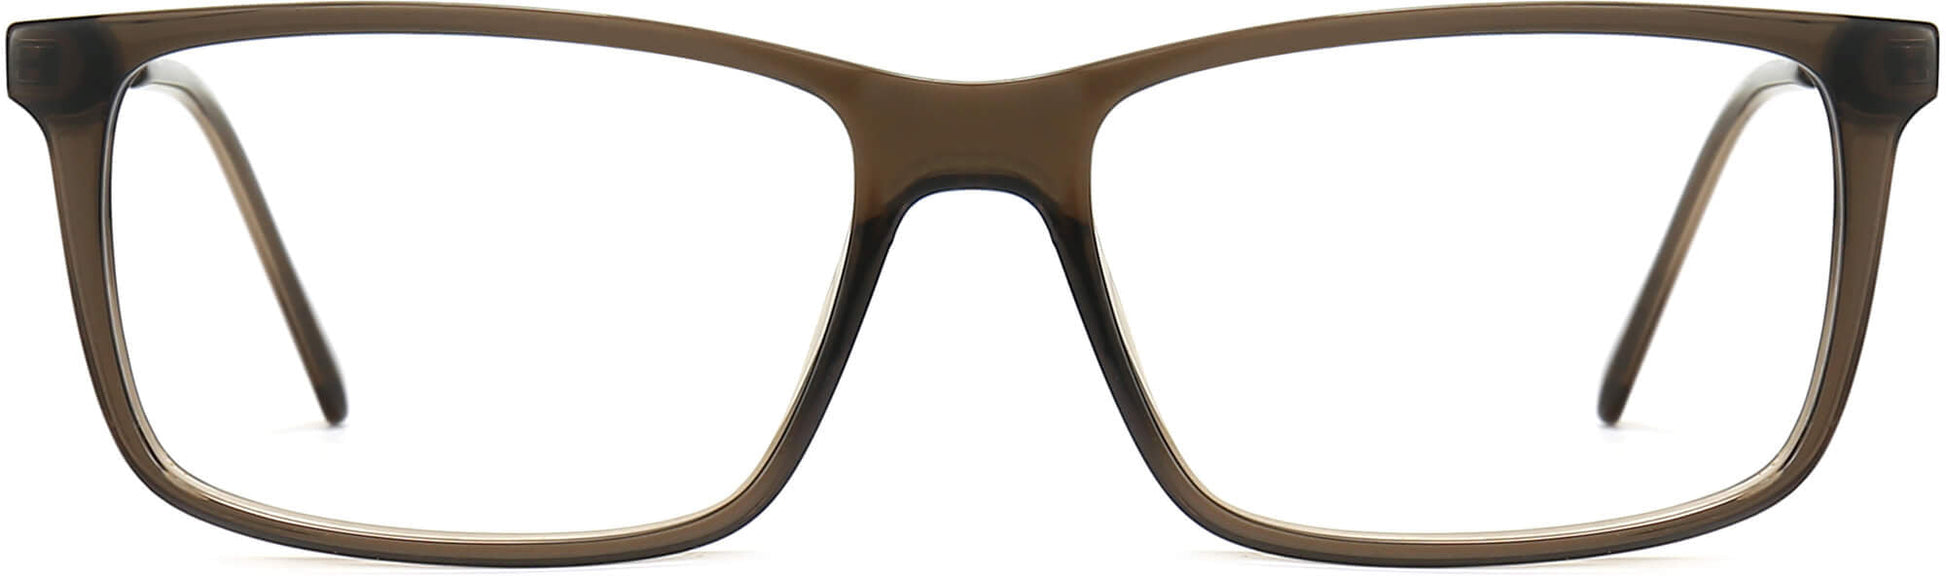 Layton Rectangle Gray Eyeglasses from ANRRI, front view